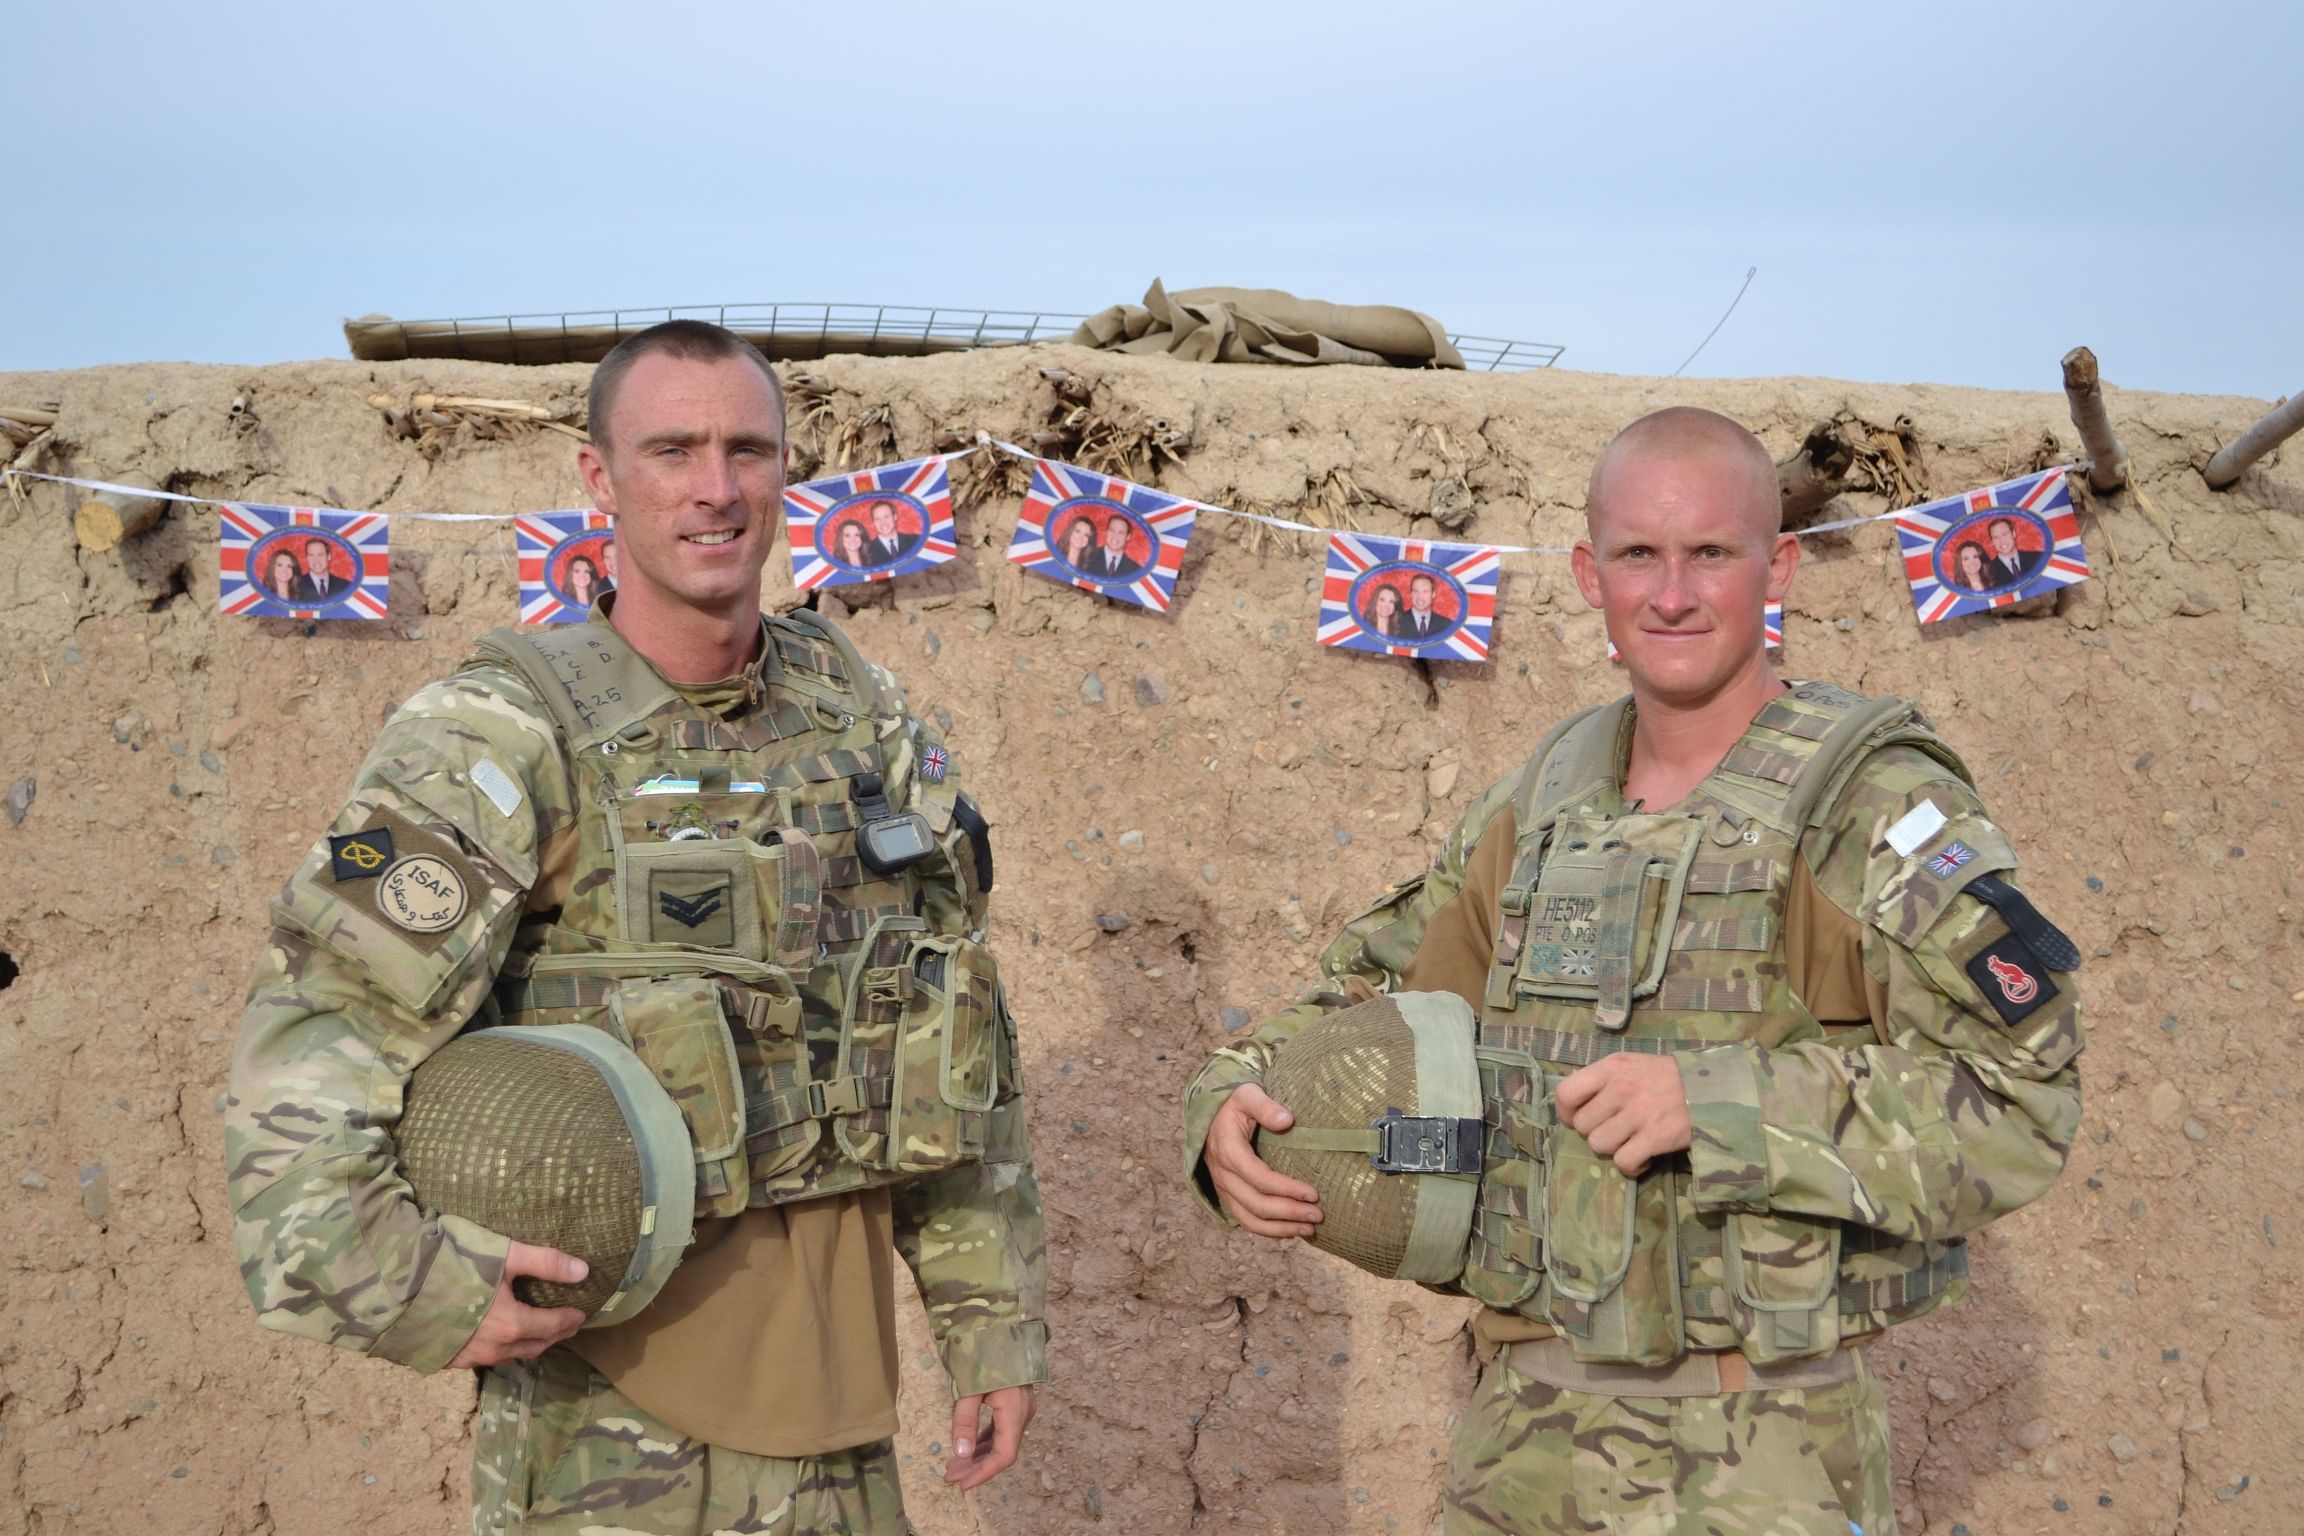 Photo taken from UK Forces Afghanistan blogsite 